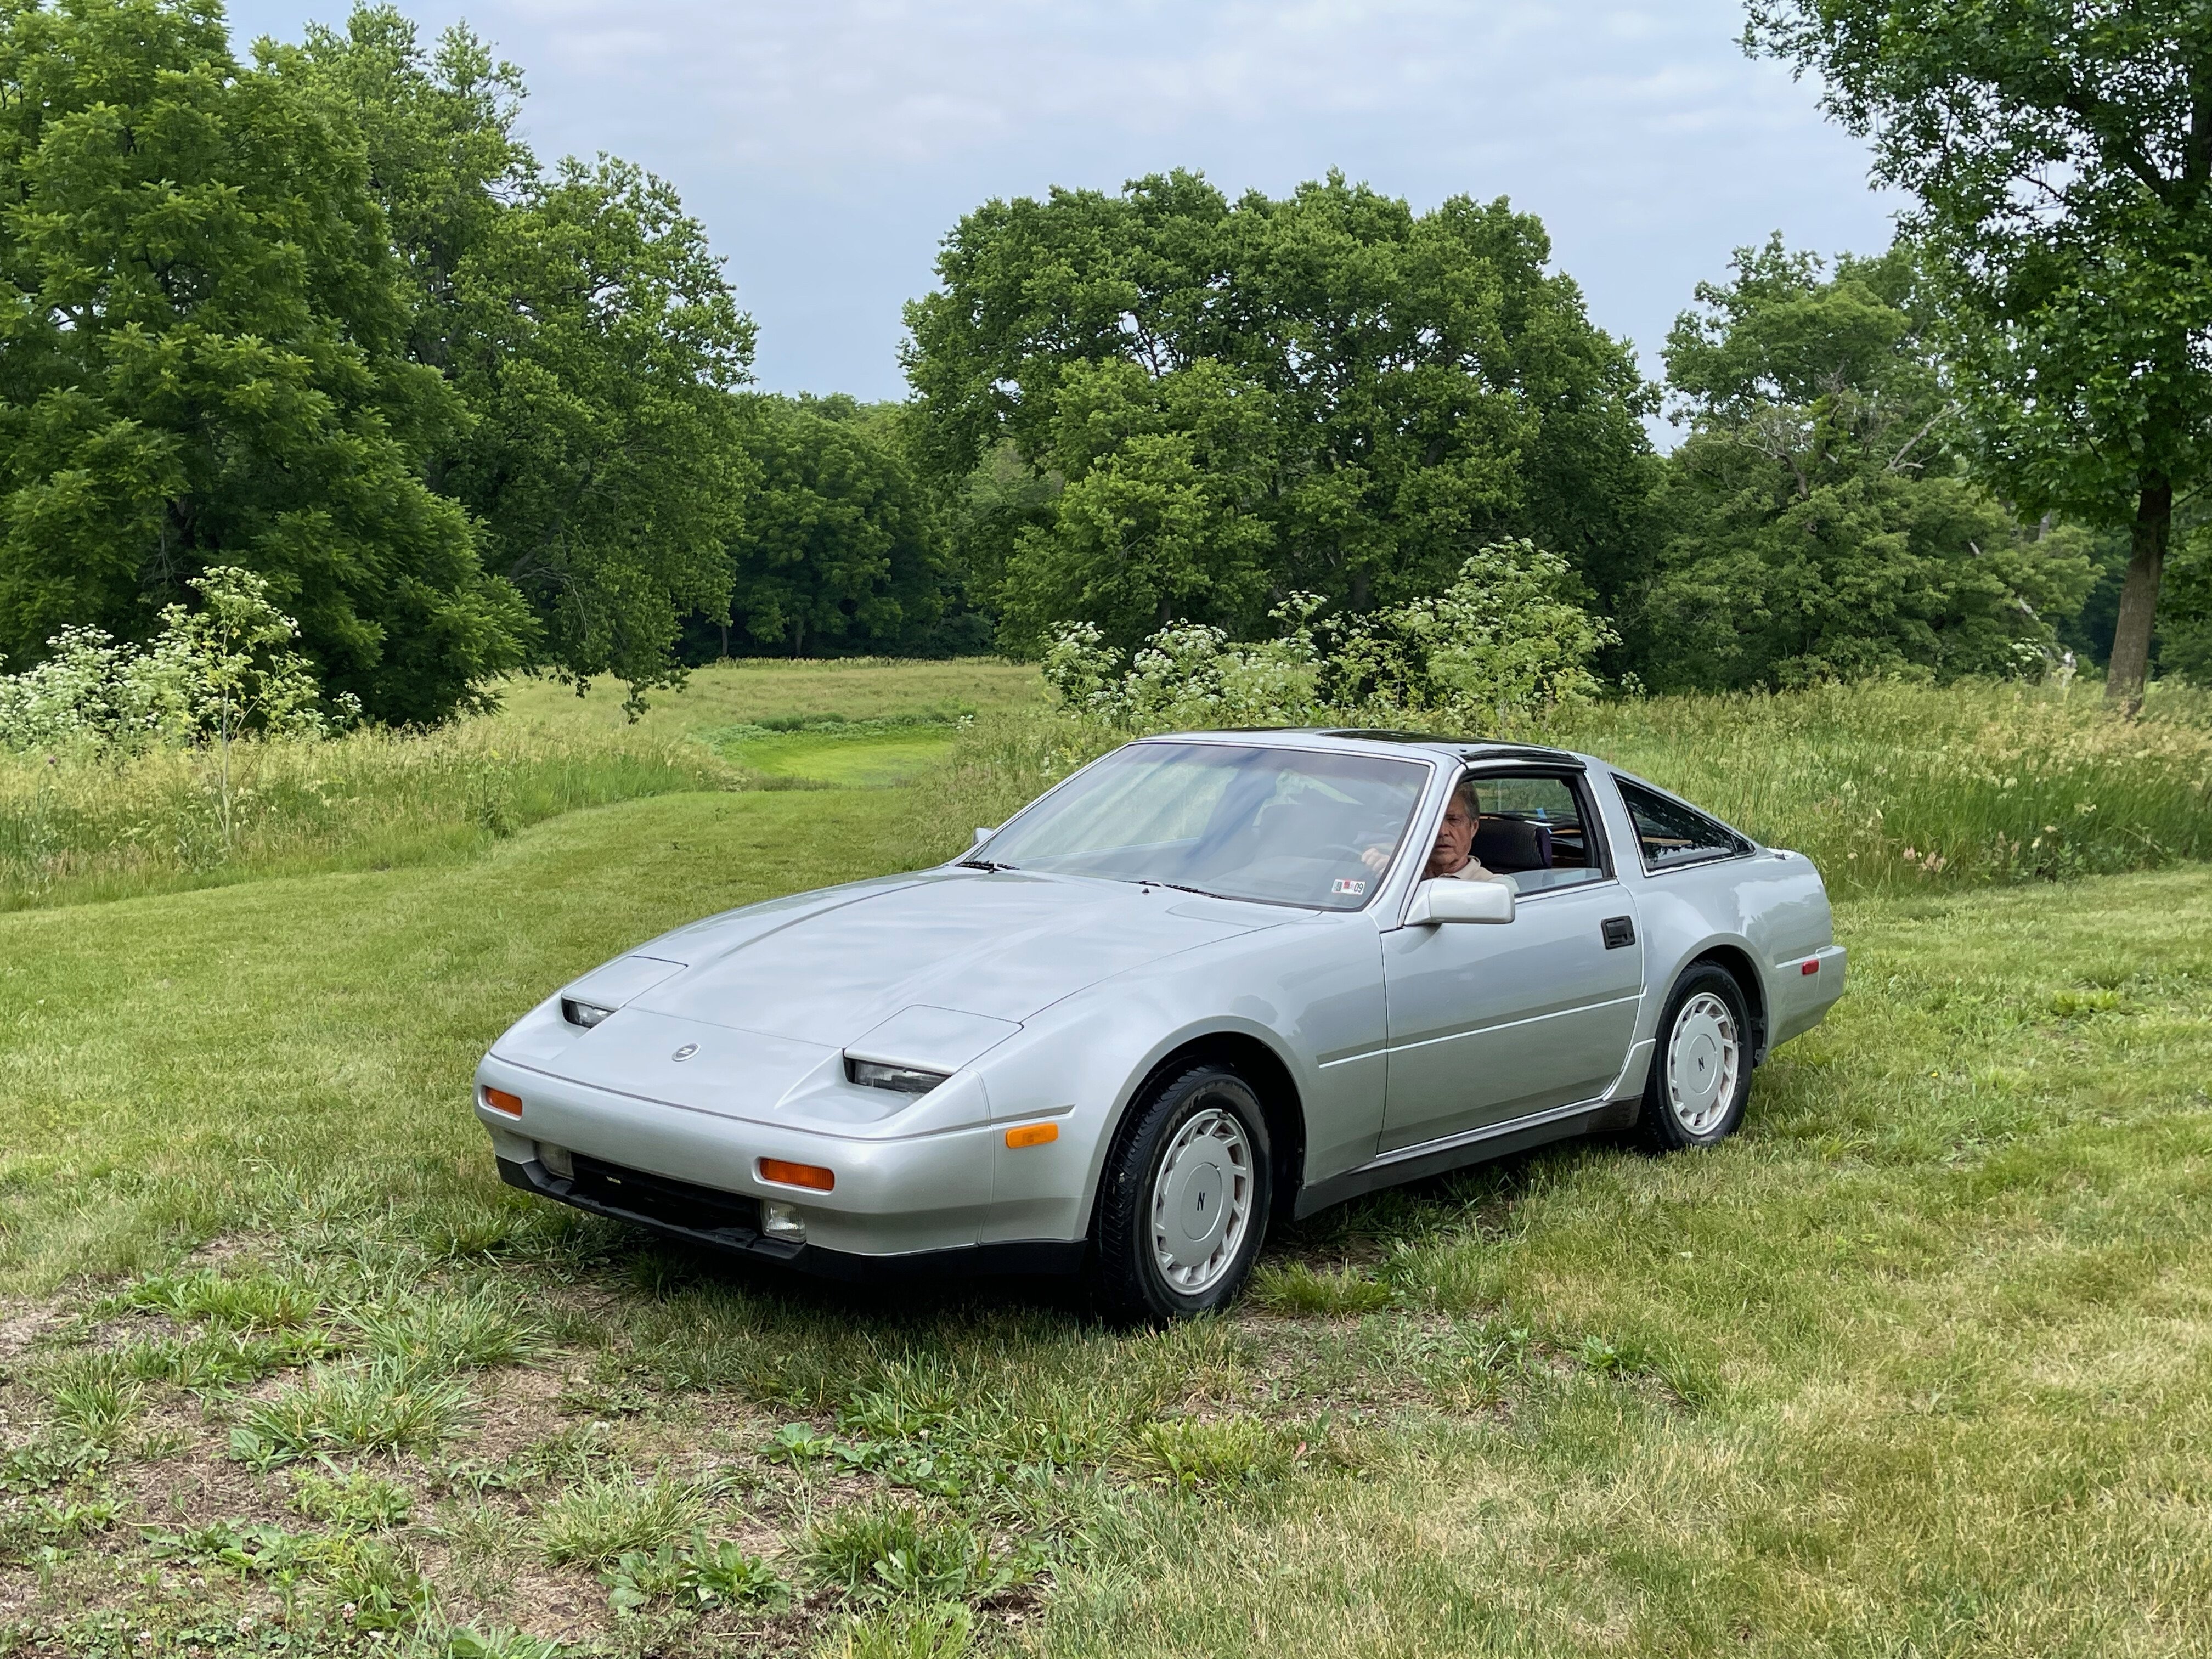 1988 Nissan 300ZX Classic Cars for Sale - Classics on Autotrader